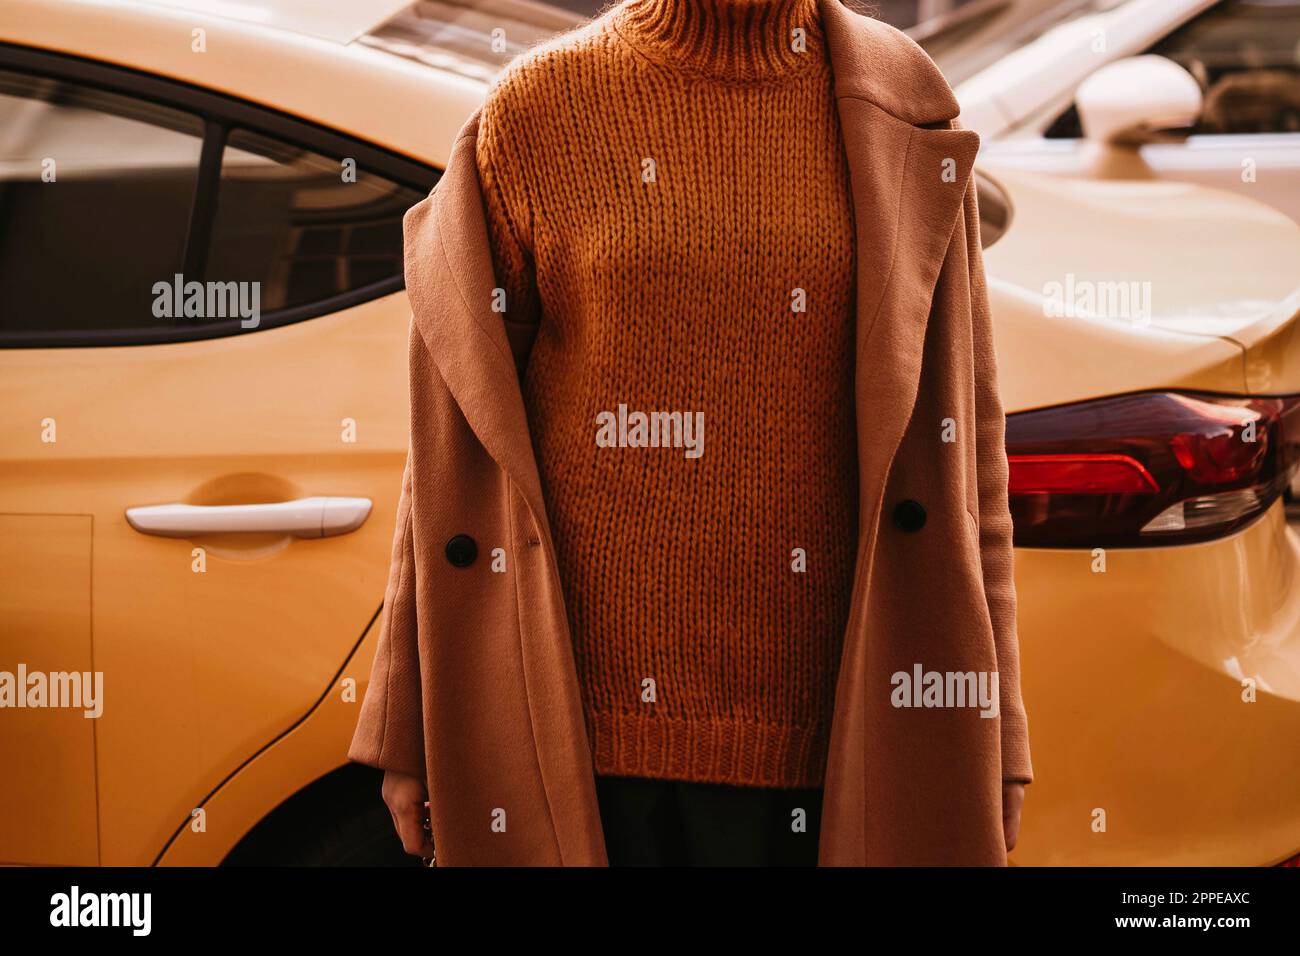 Female body in the orange warm knitting cozy sweater and long brown coat against the yellow taxi.. Urban autumn clothes street style concept Stock Photo